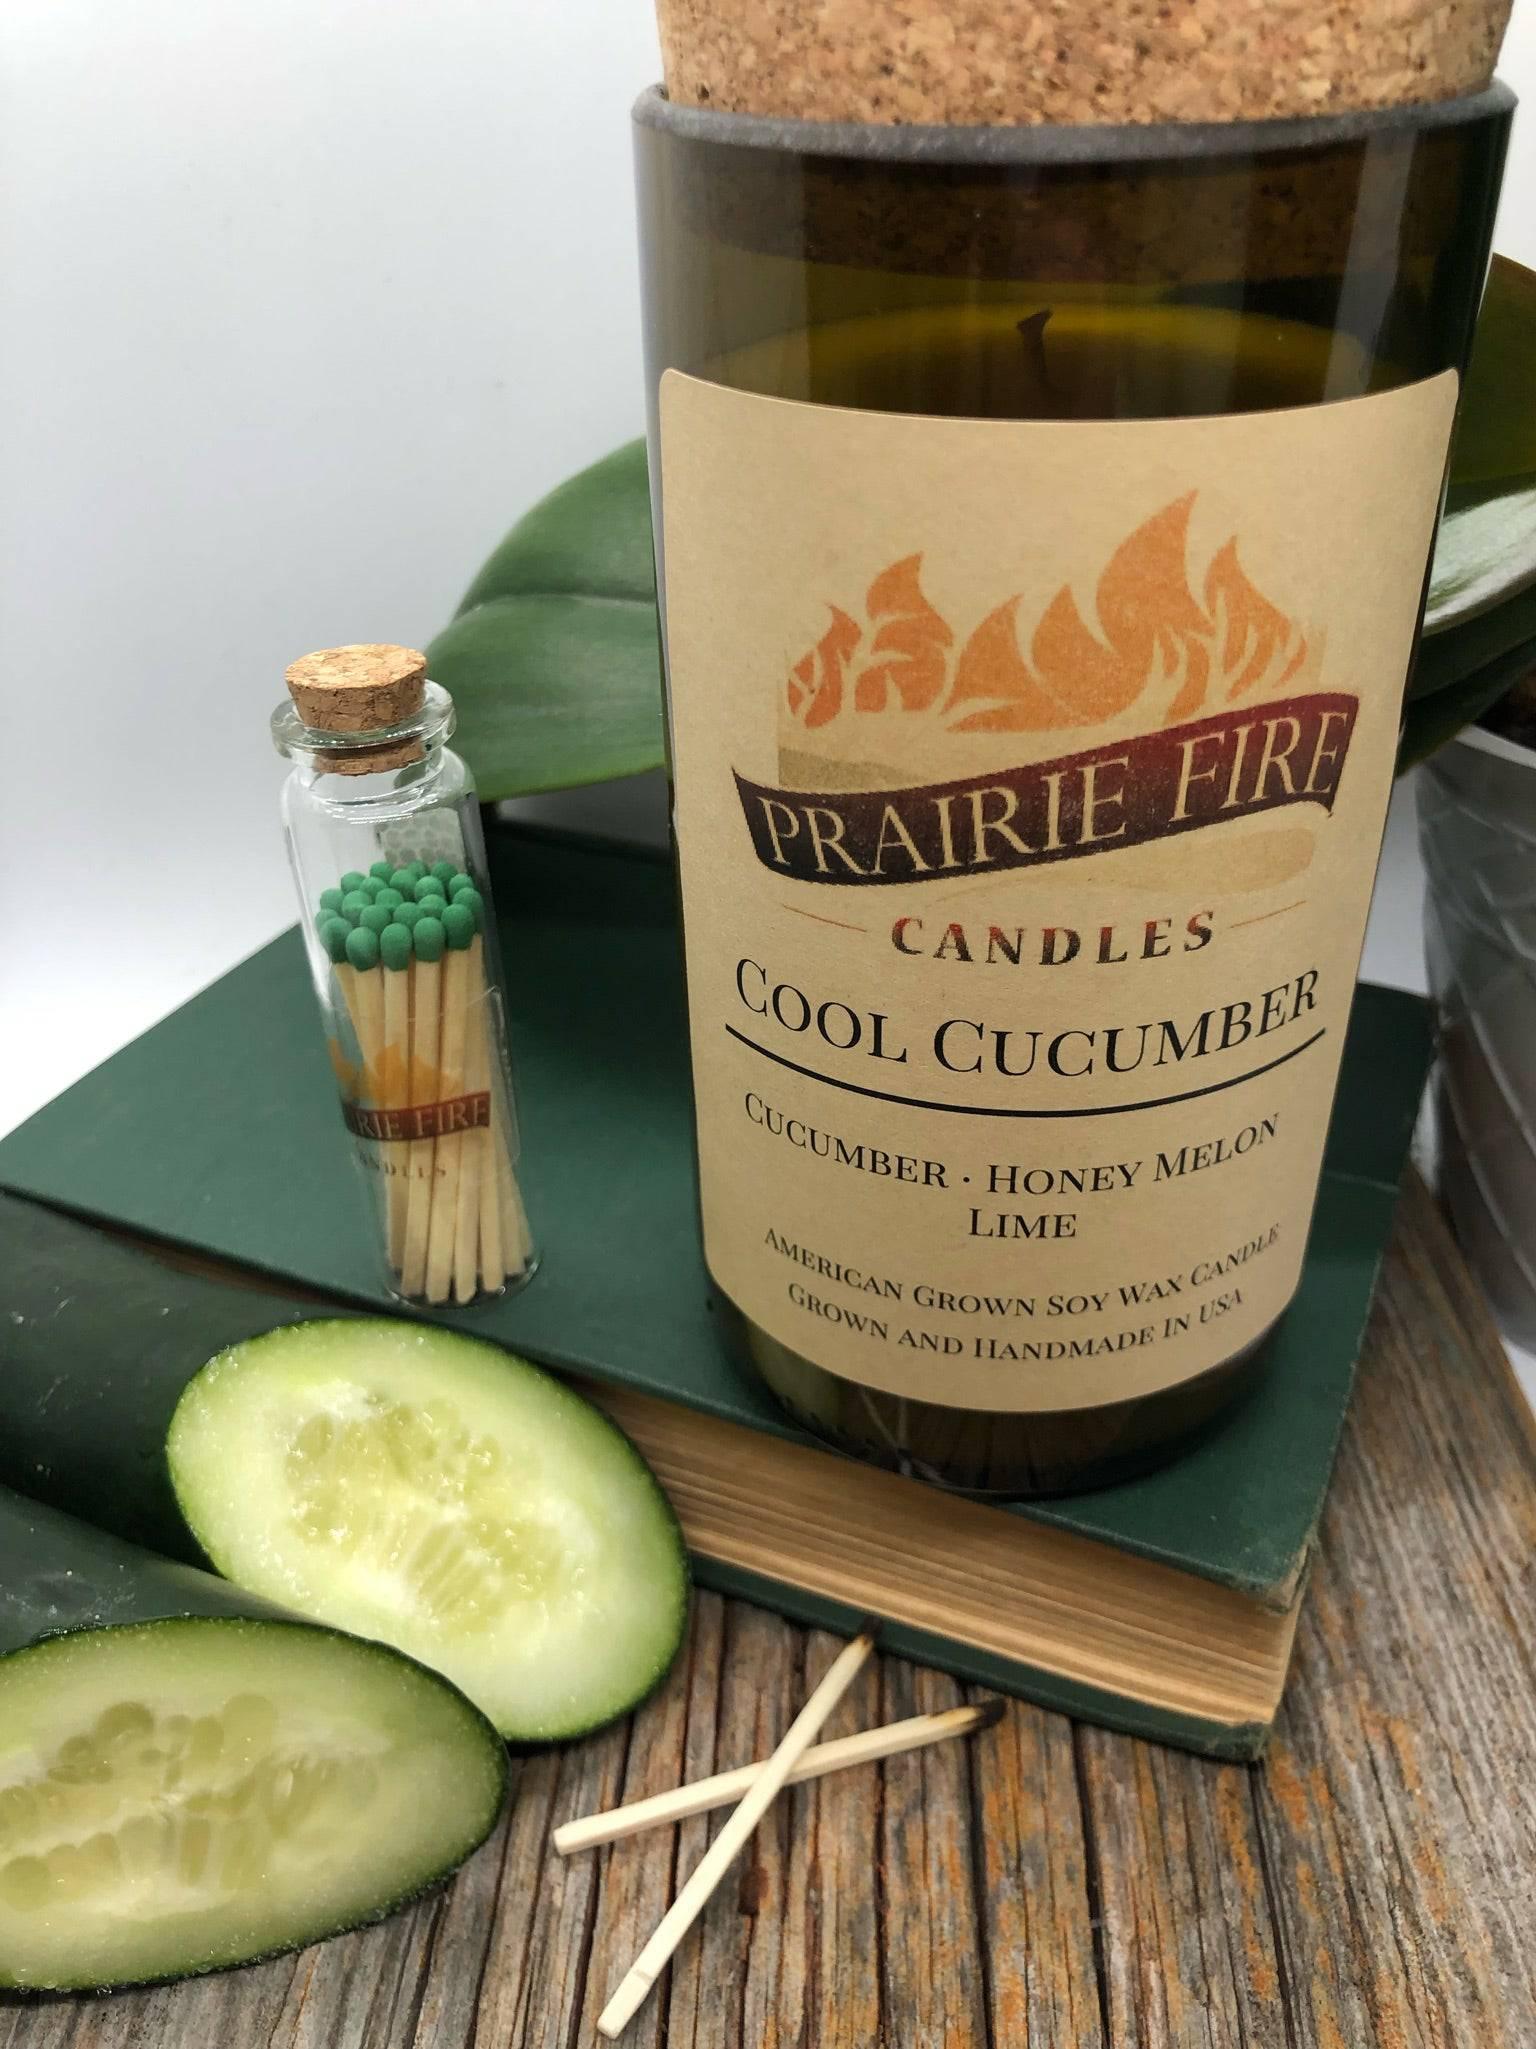 Cool Cucumber Soy Wax Candle | Repurposed Wine Bottle Candle Natural Cork | Handmade in USA Candle | Eco-Friendly Candle | Non-Toxic Soy Candle - Prairie Fire Candles